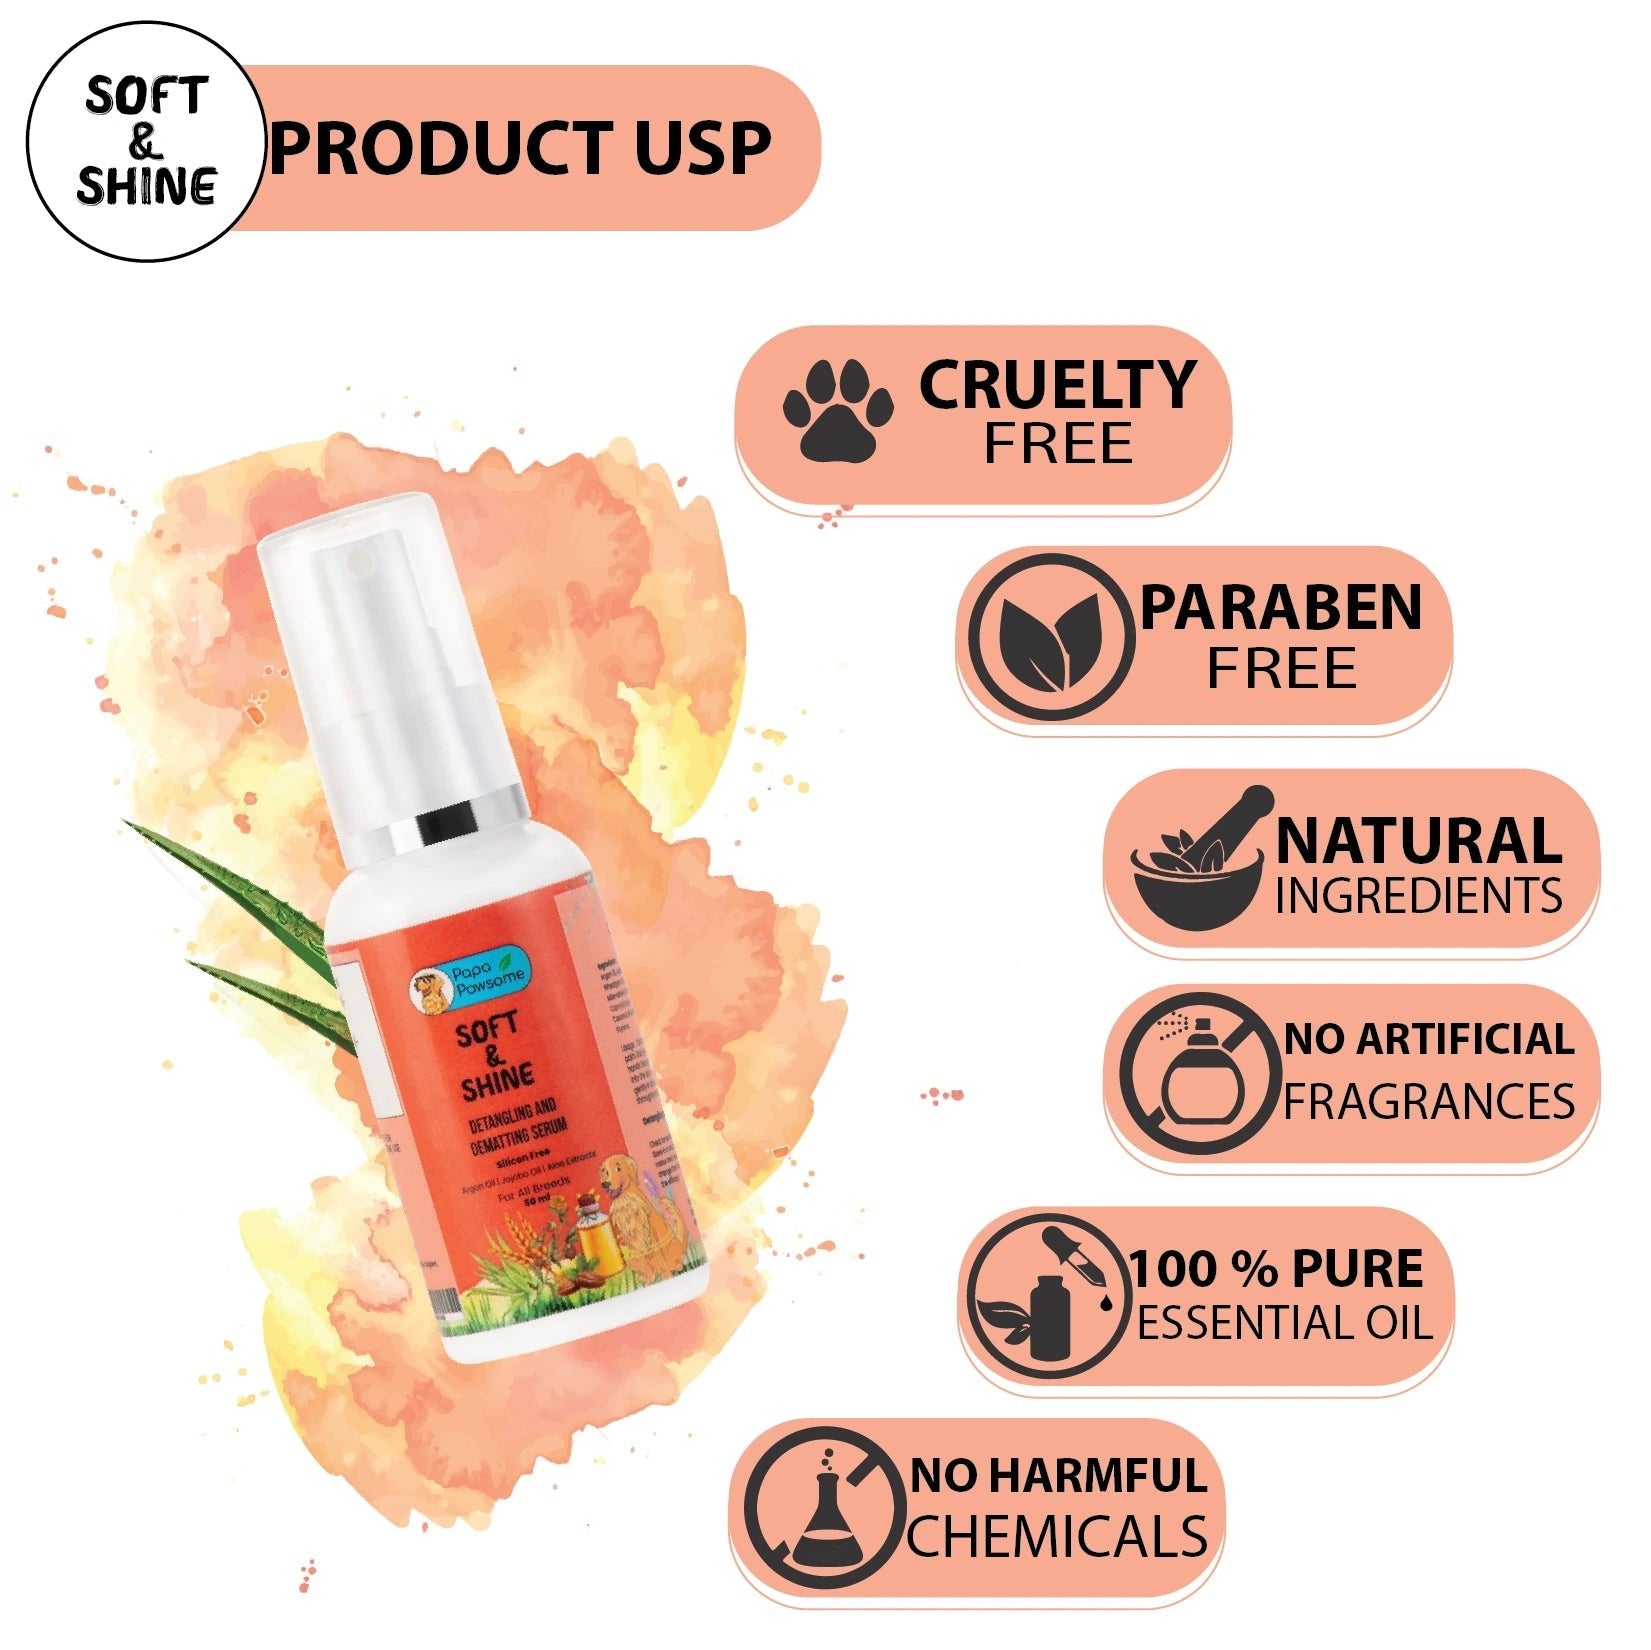 Cruelty-free, paraben-free, natural ingredients, no artificial fragrances, 100% pure essential oils, no harmful chemicals